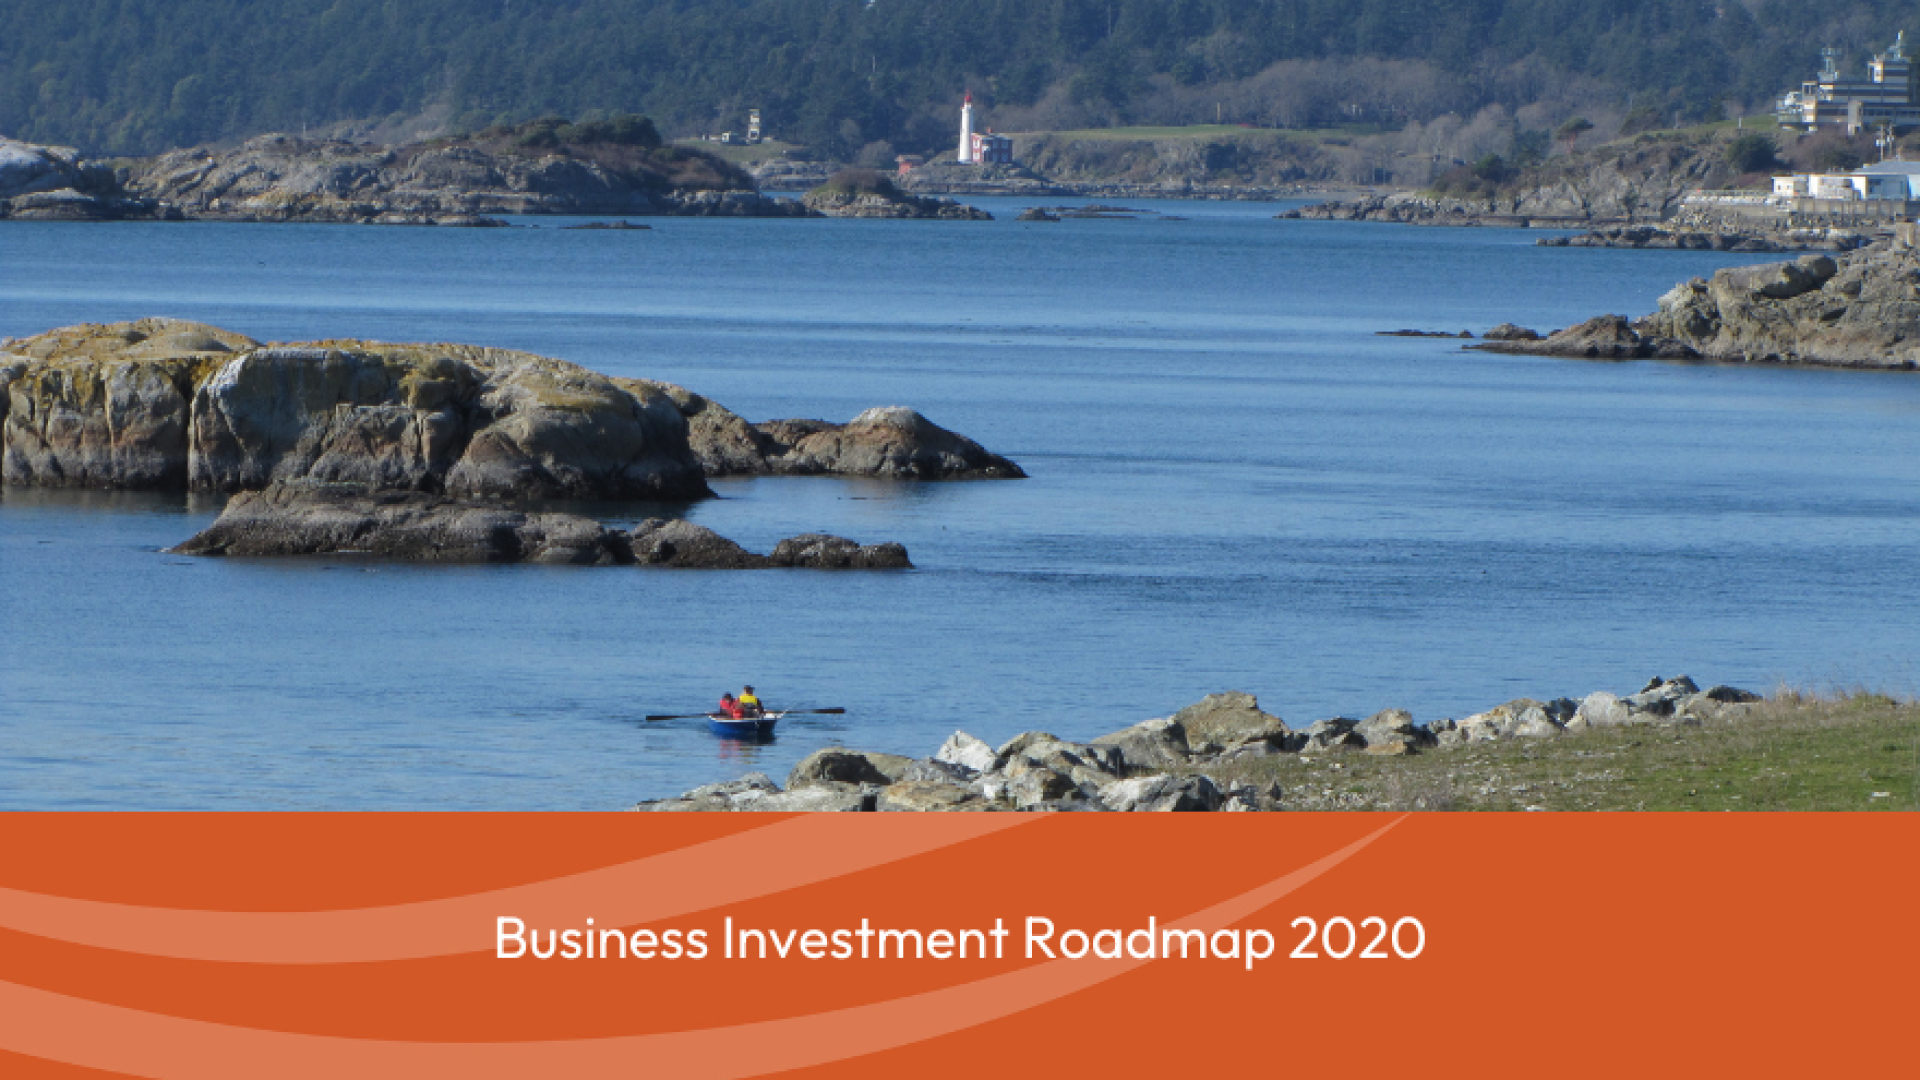 Business Investment Roadmap 2020